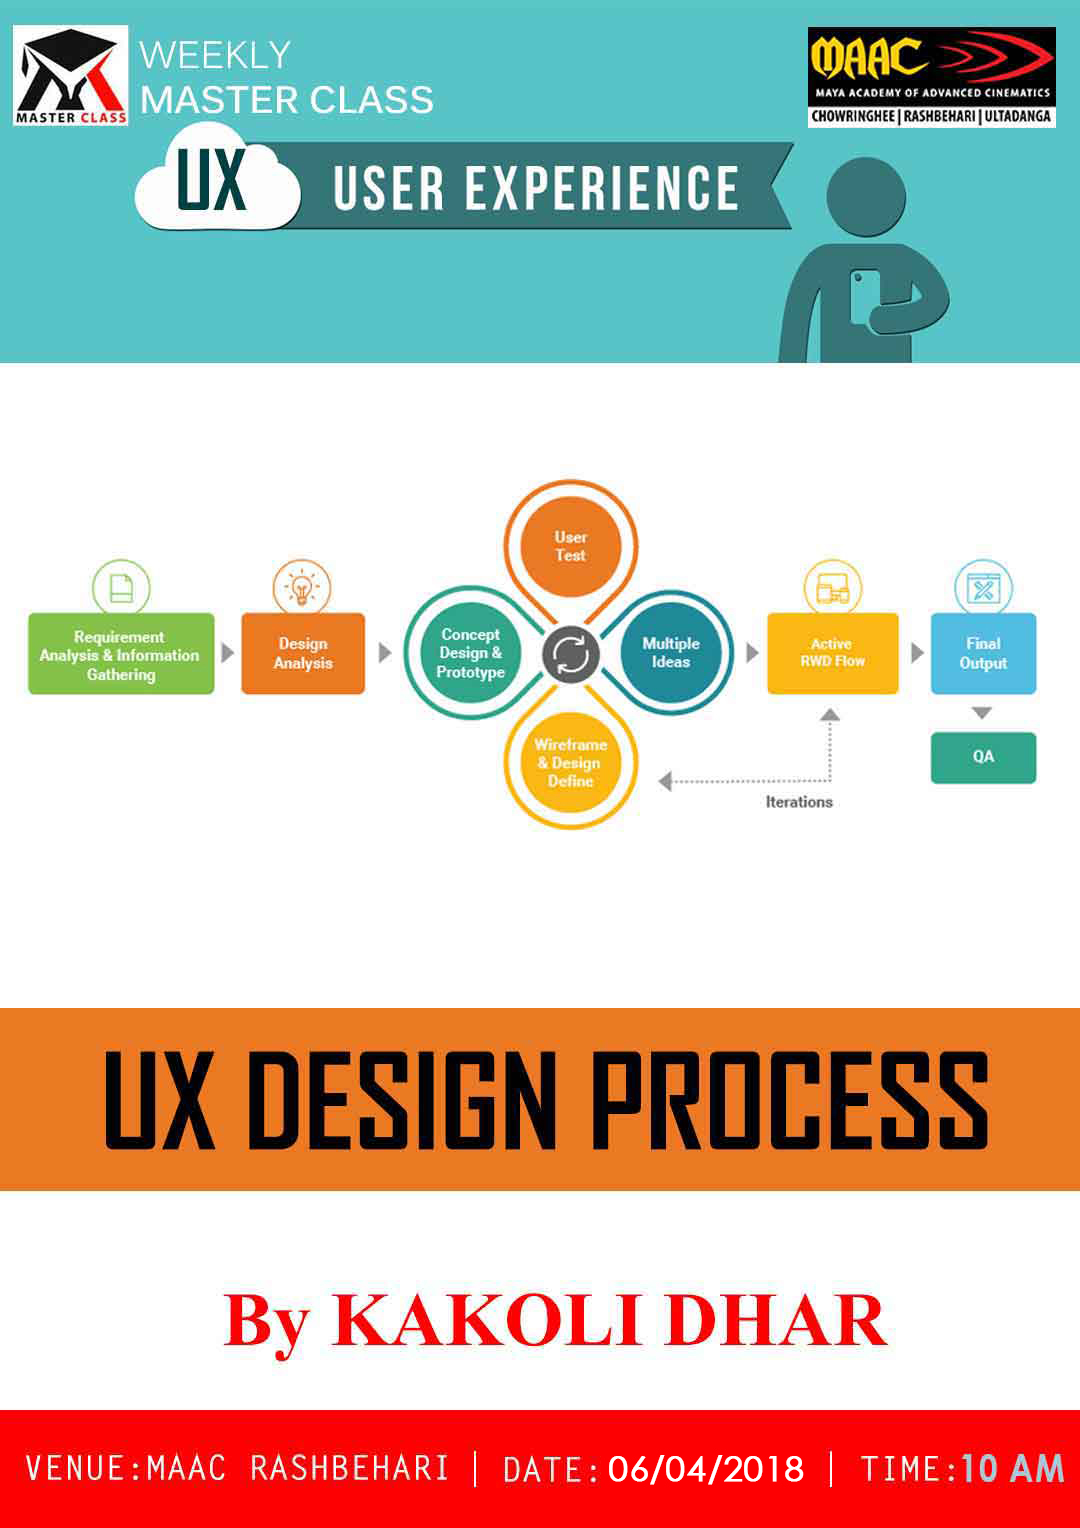 Weekly Master Class on UX Design Process